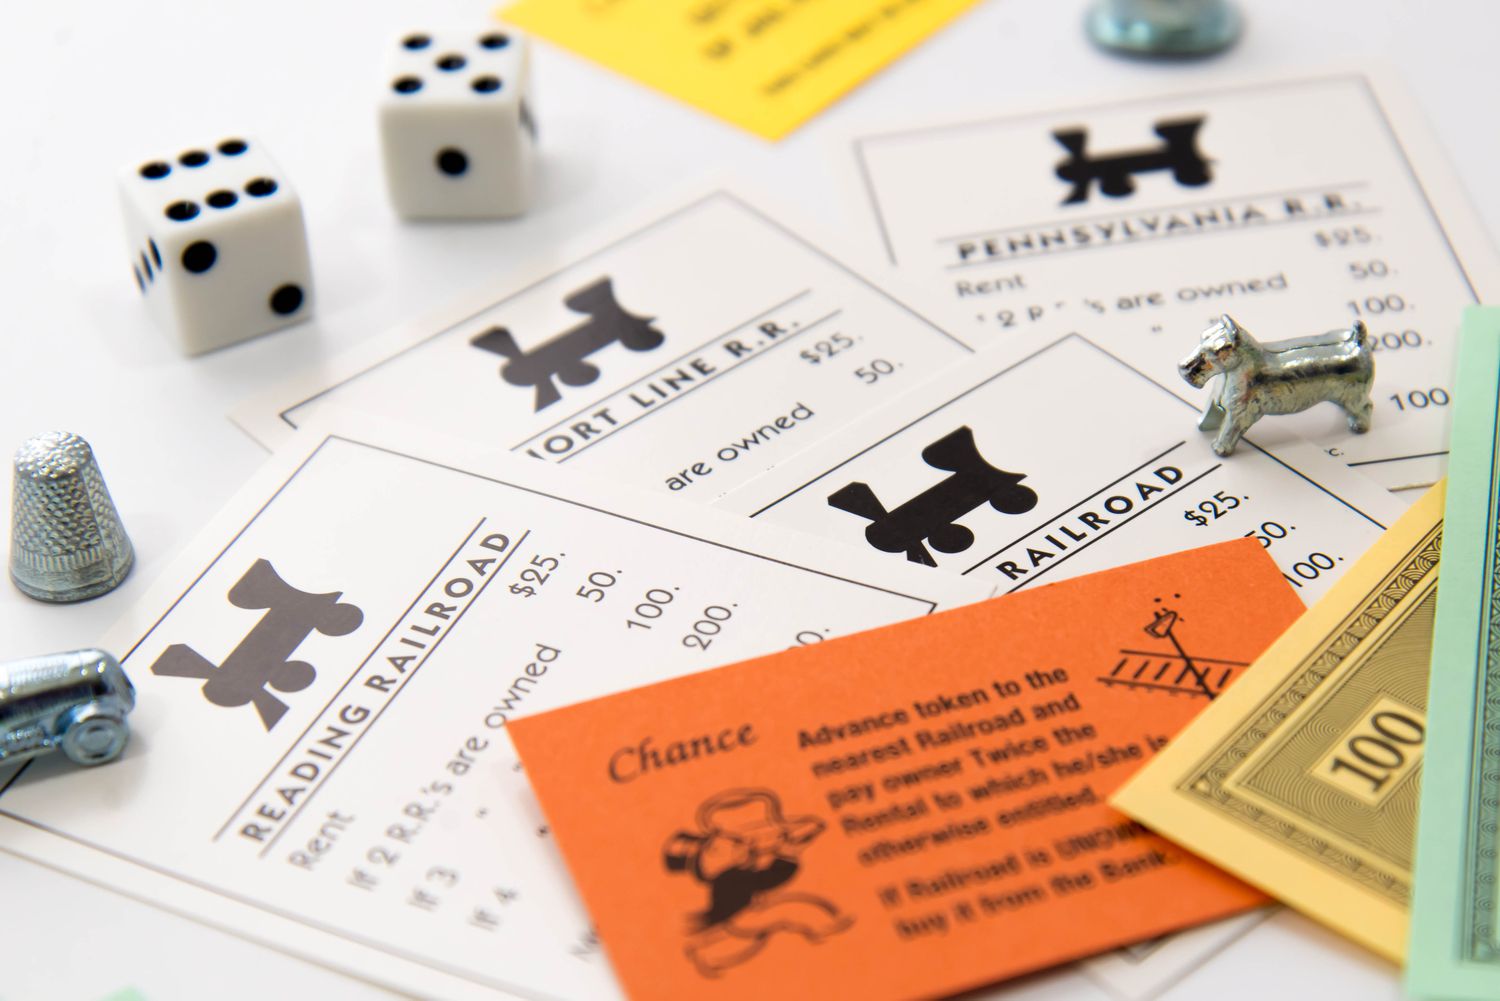 Which One Of The Four Railroads In Monopoly Was Not A Real Railroad?